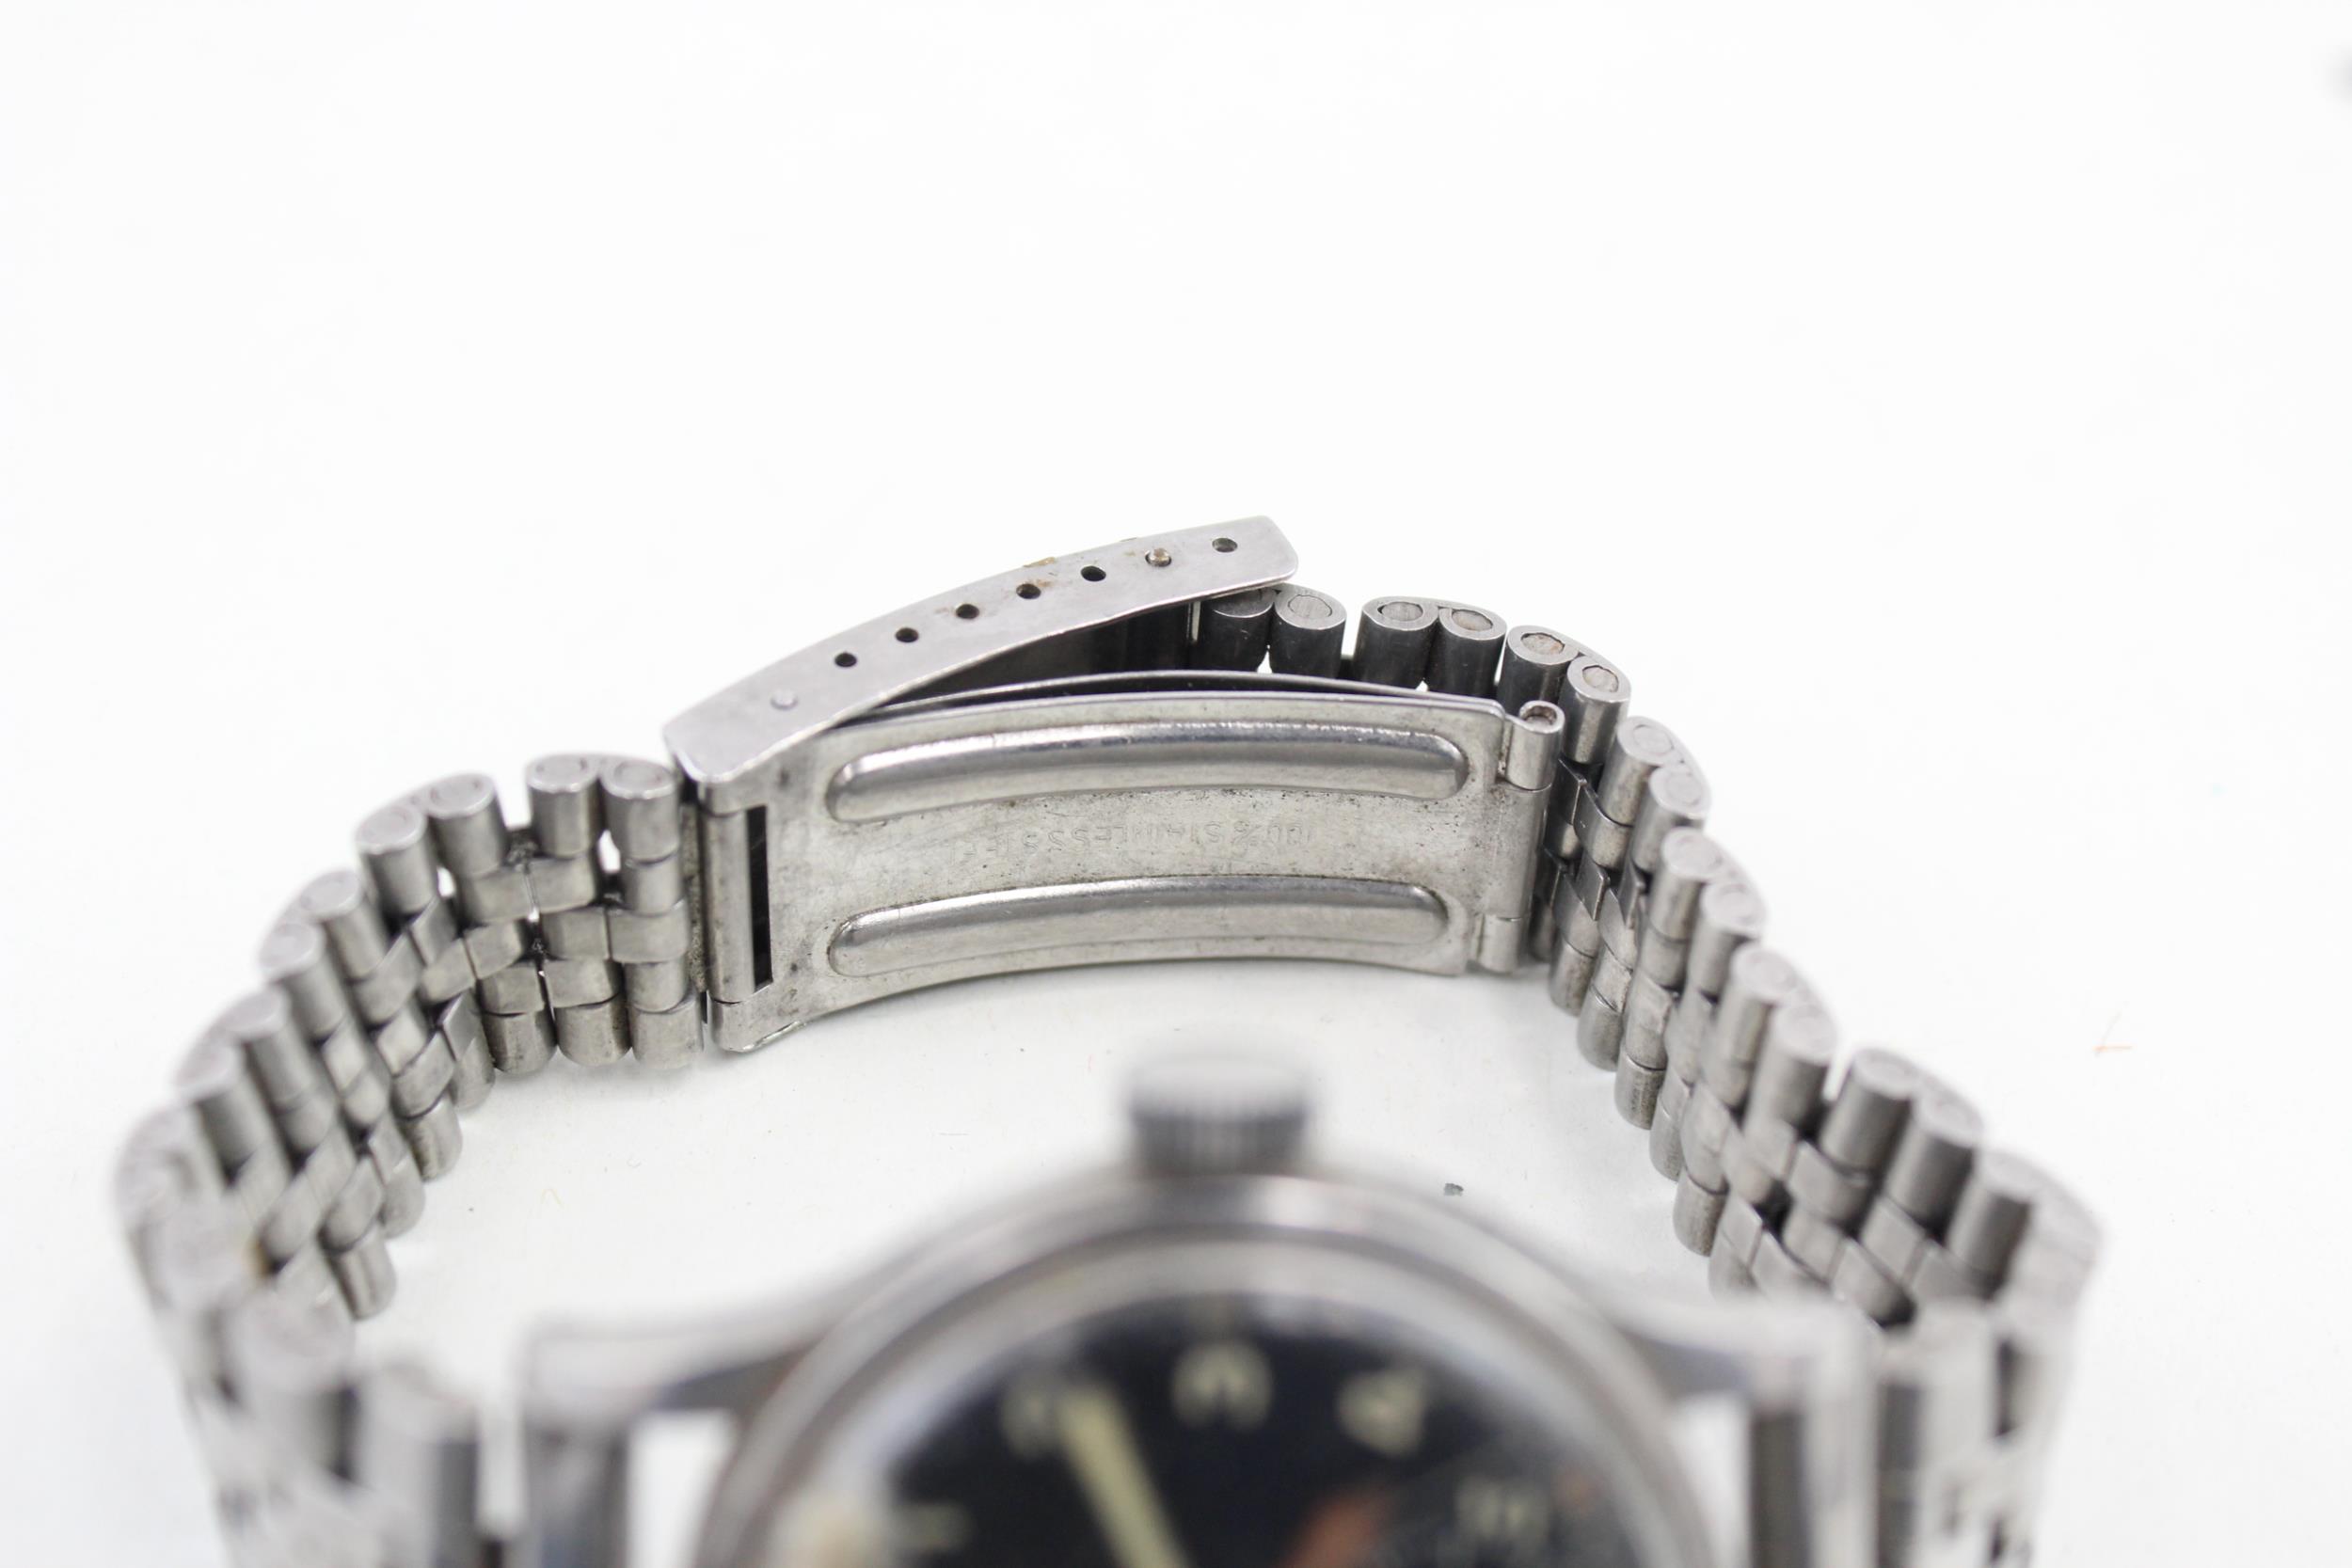 Omega 'Dirty Dozen' Military Issued WRISTWATCH Hand-Wind Requires Repair - Omega 'Dirty Dozen' - Image 3 of 6